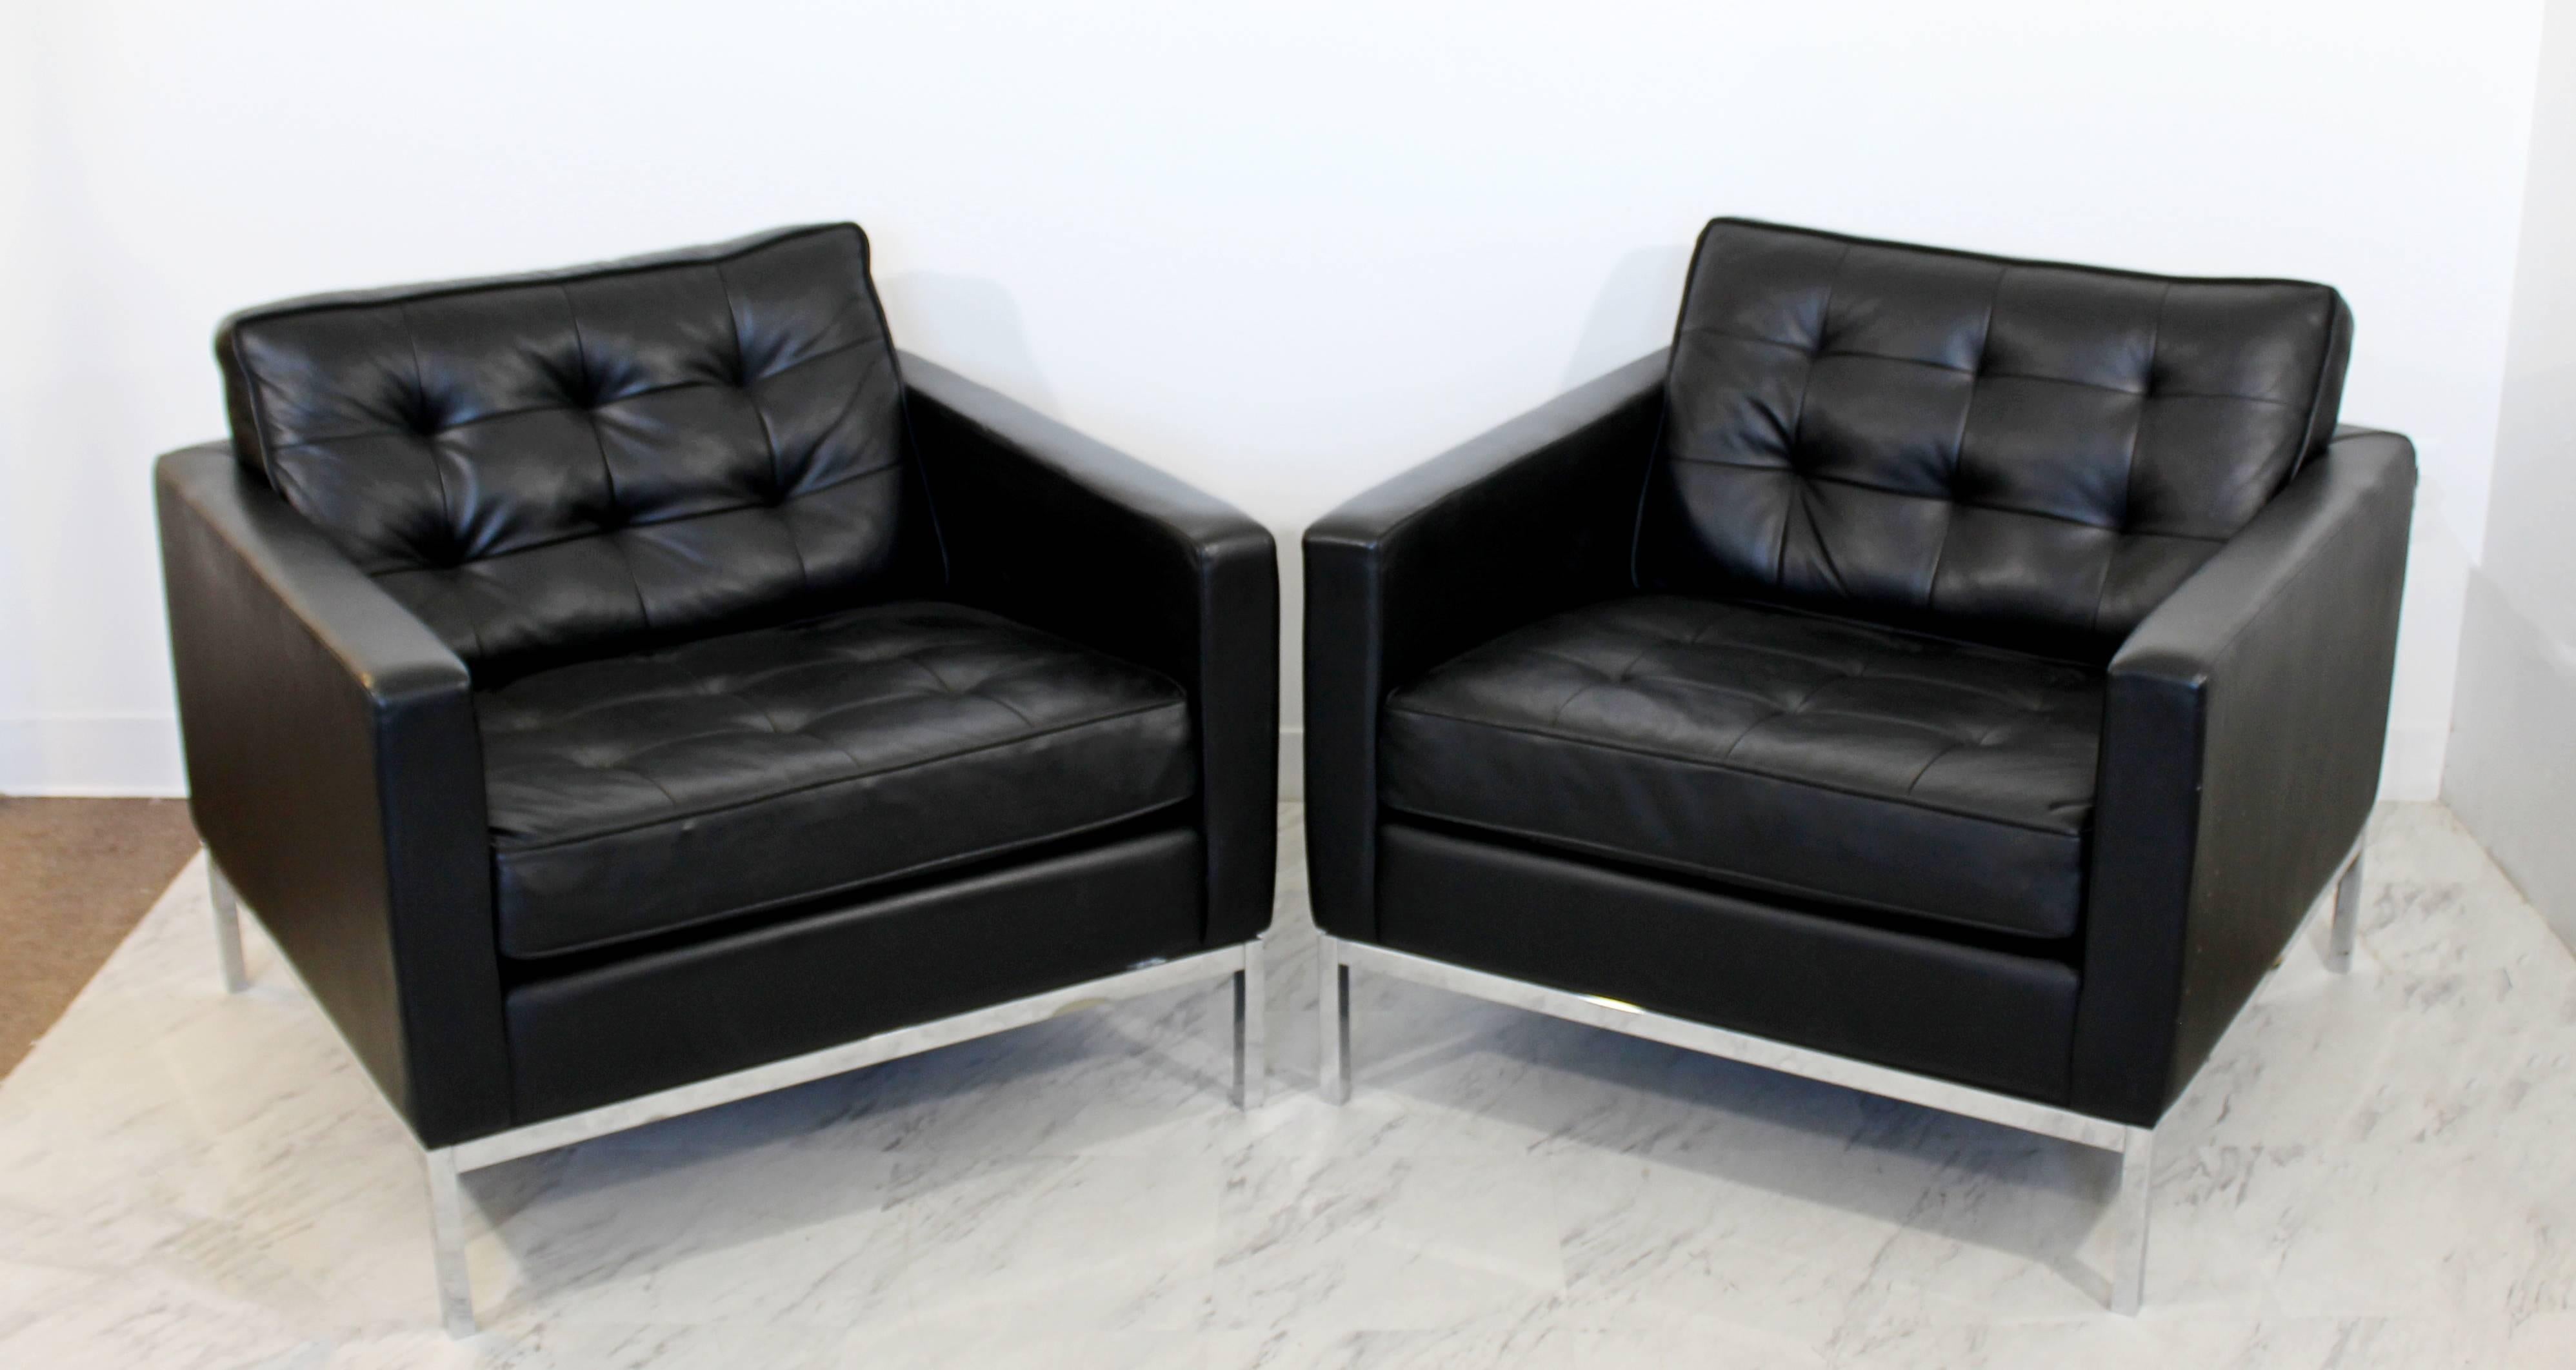 For your consideration is a beautiful pair of chrome cube lounge chairs, with tufted black leather upholstery by Knoll. In excellent condition. The dimensions are 32.5